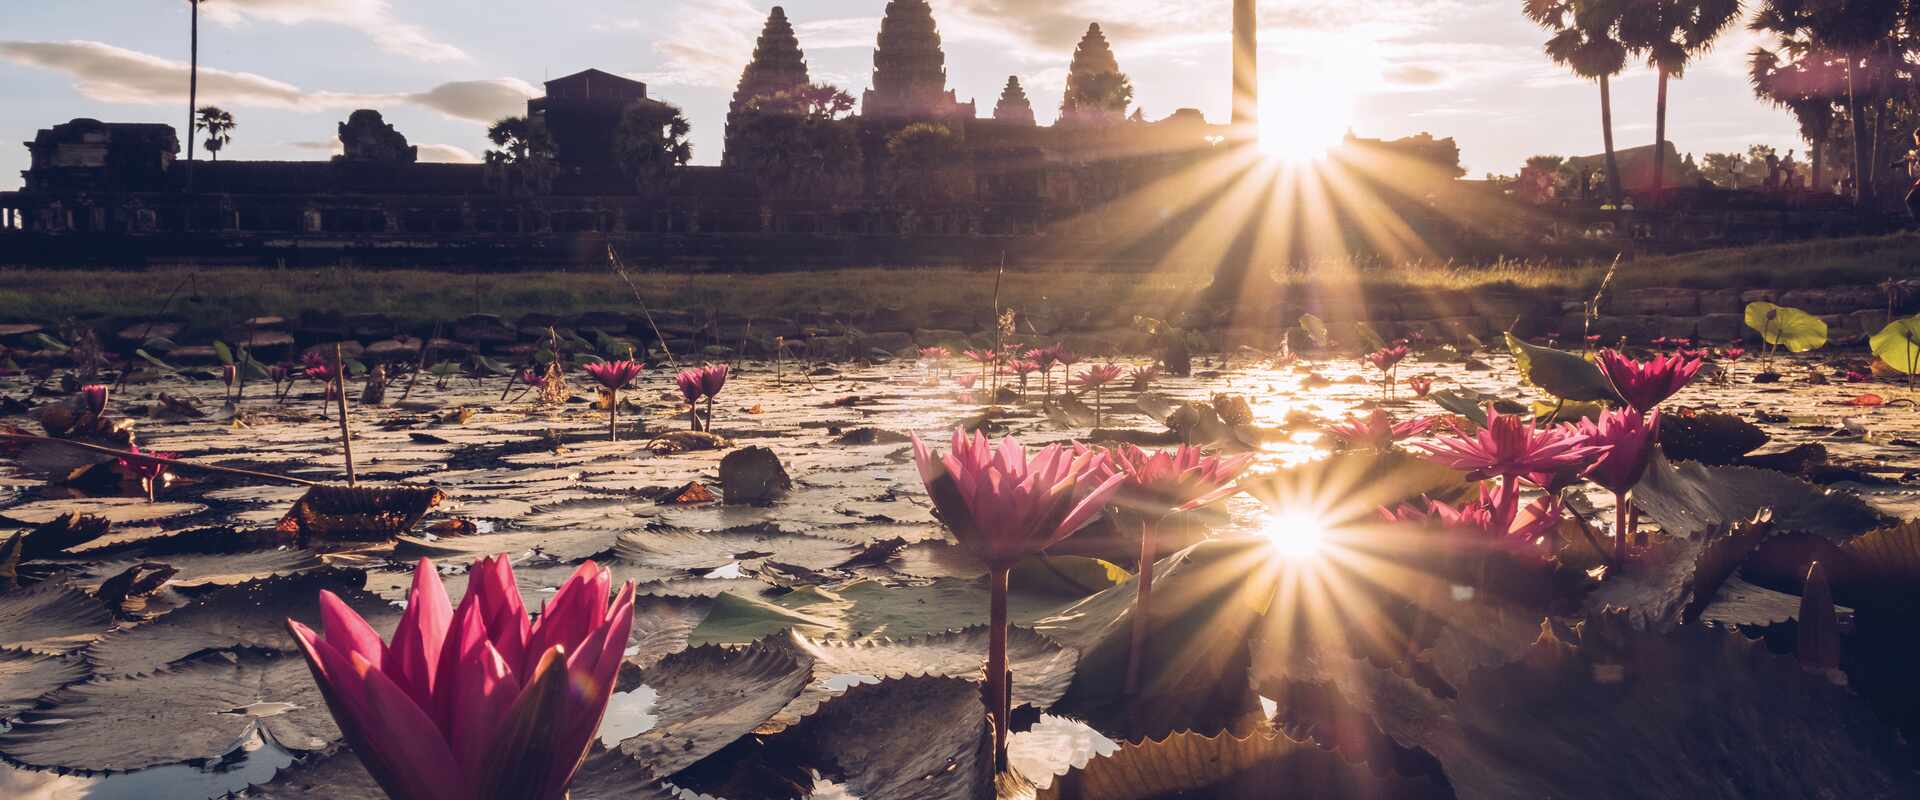 Pink lotus flower on a lake with Angkor Wat outline in the suns rays